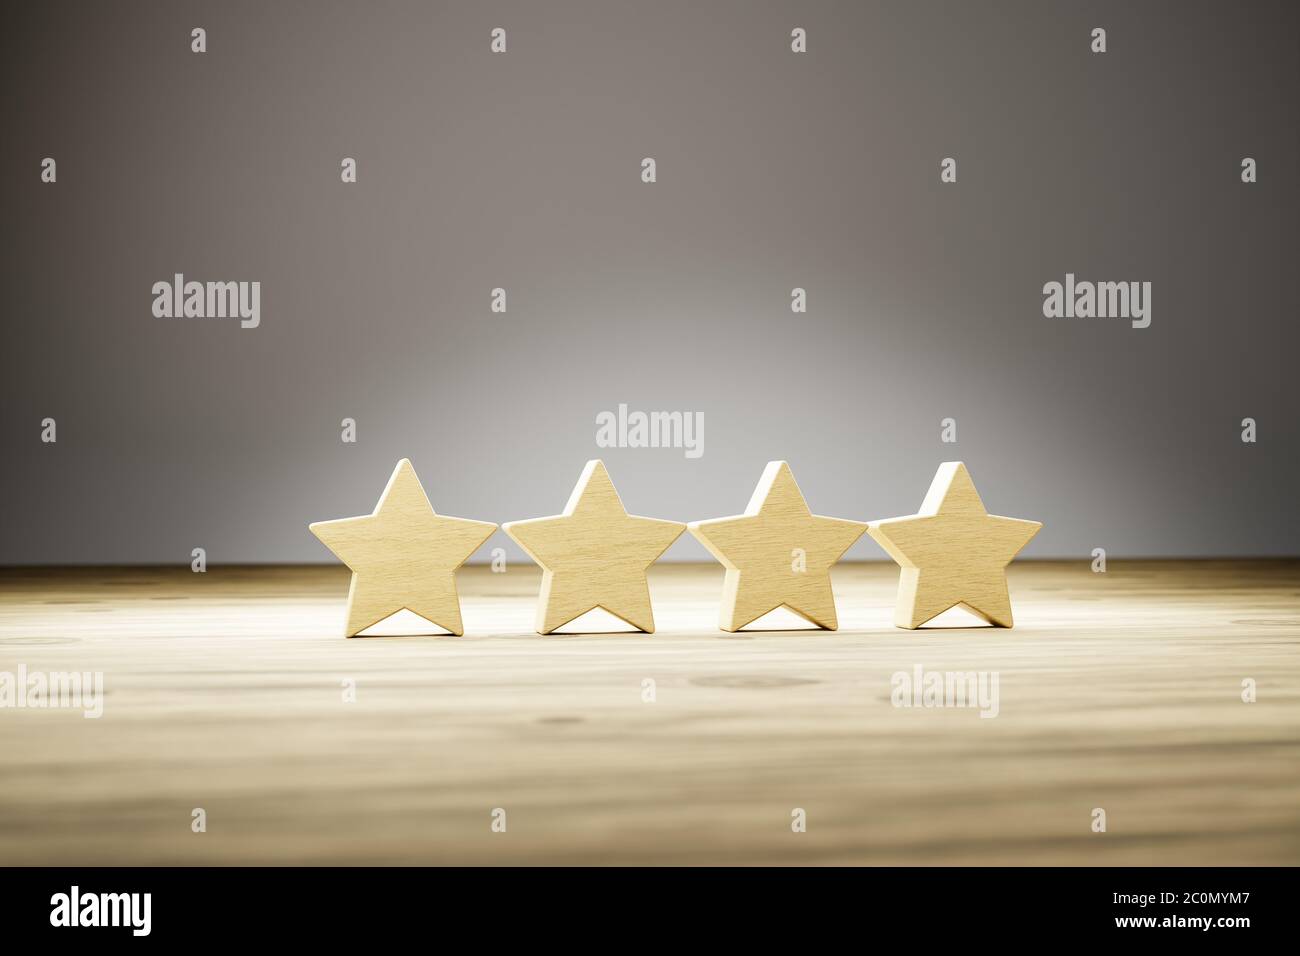 Four star rating: four wooden stars in a row on a wooden table with gray background. Selective focus. Concept shot for rating / reviews. Stock Photo